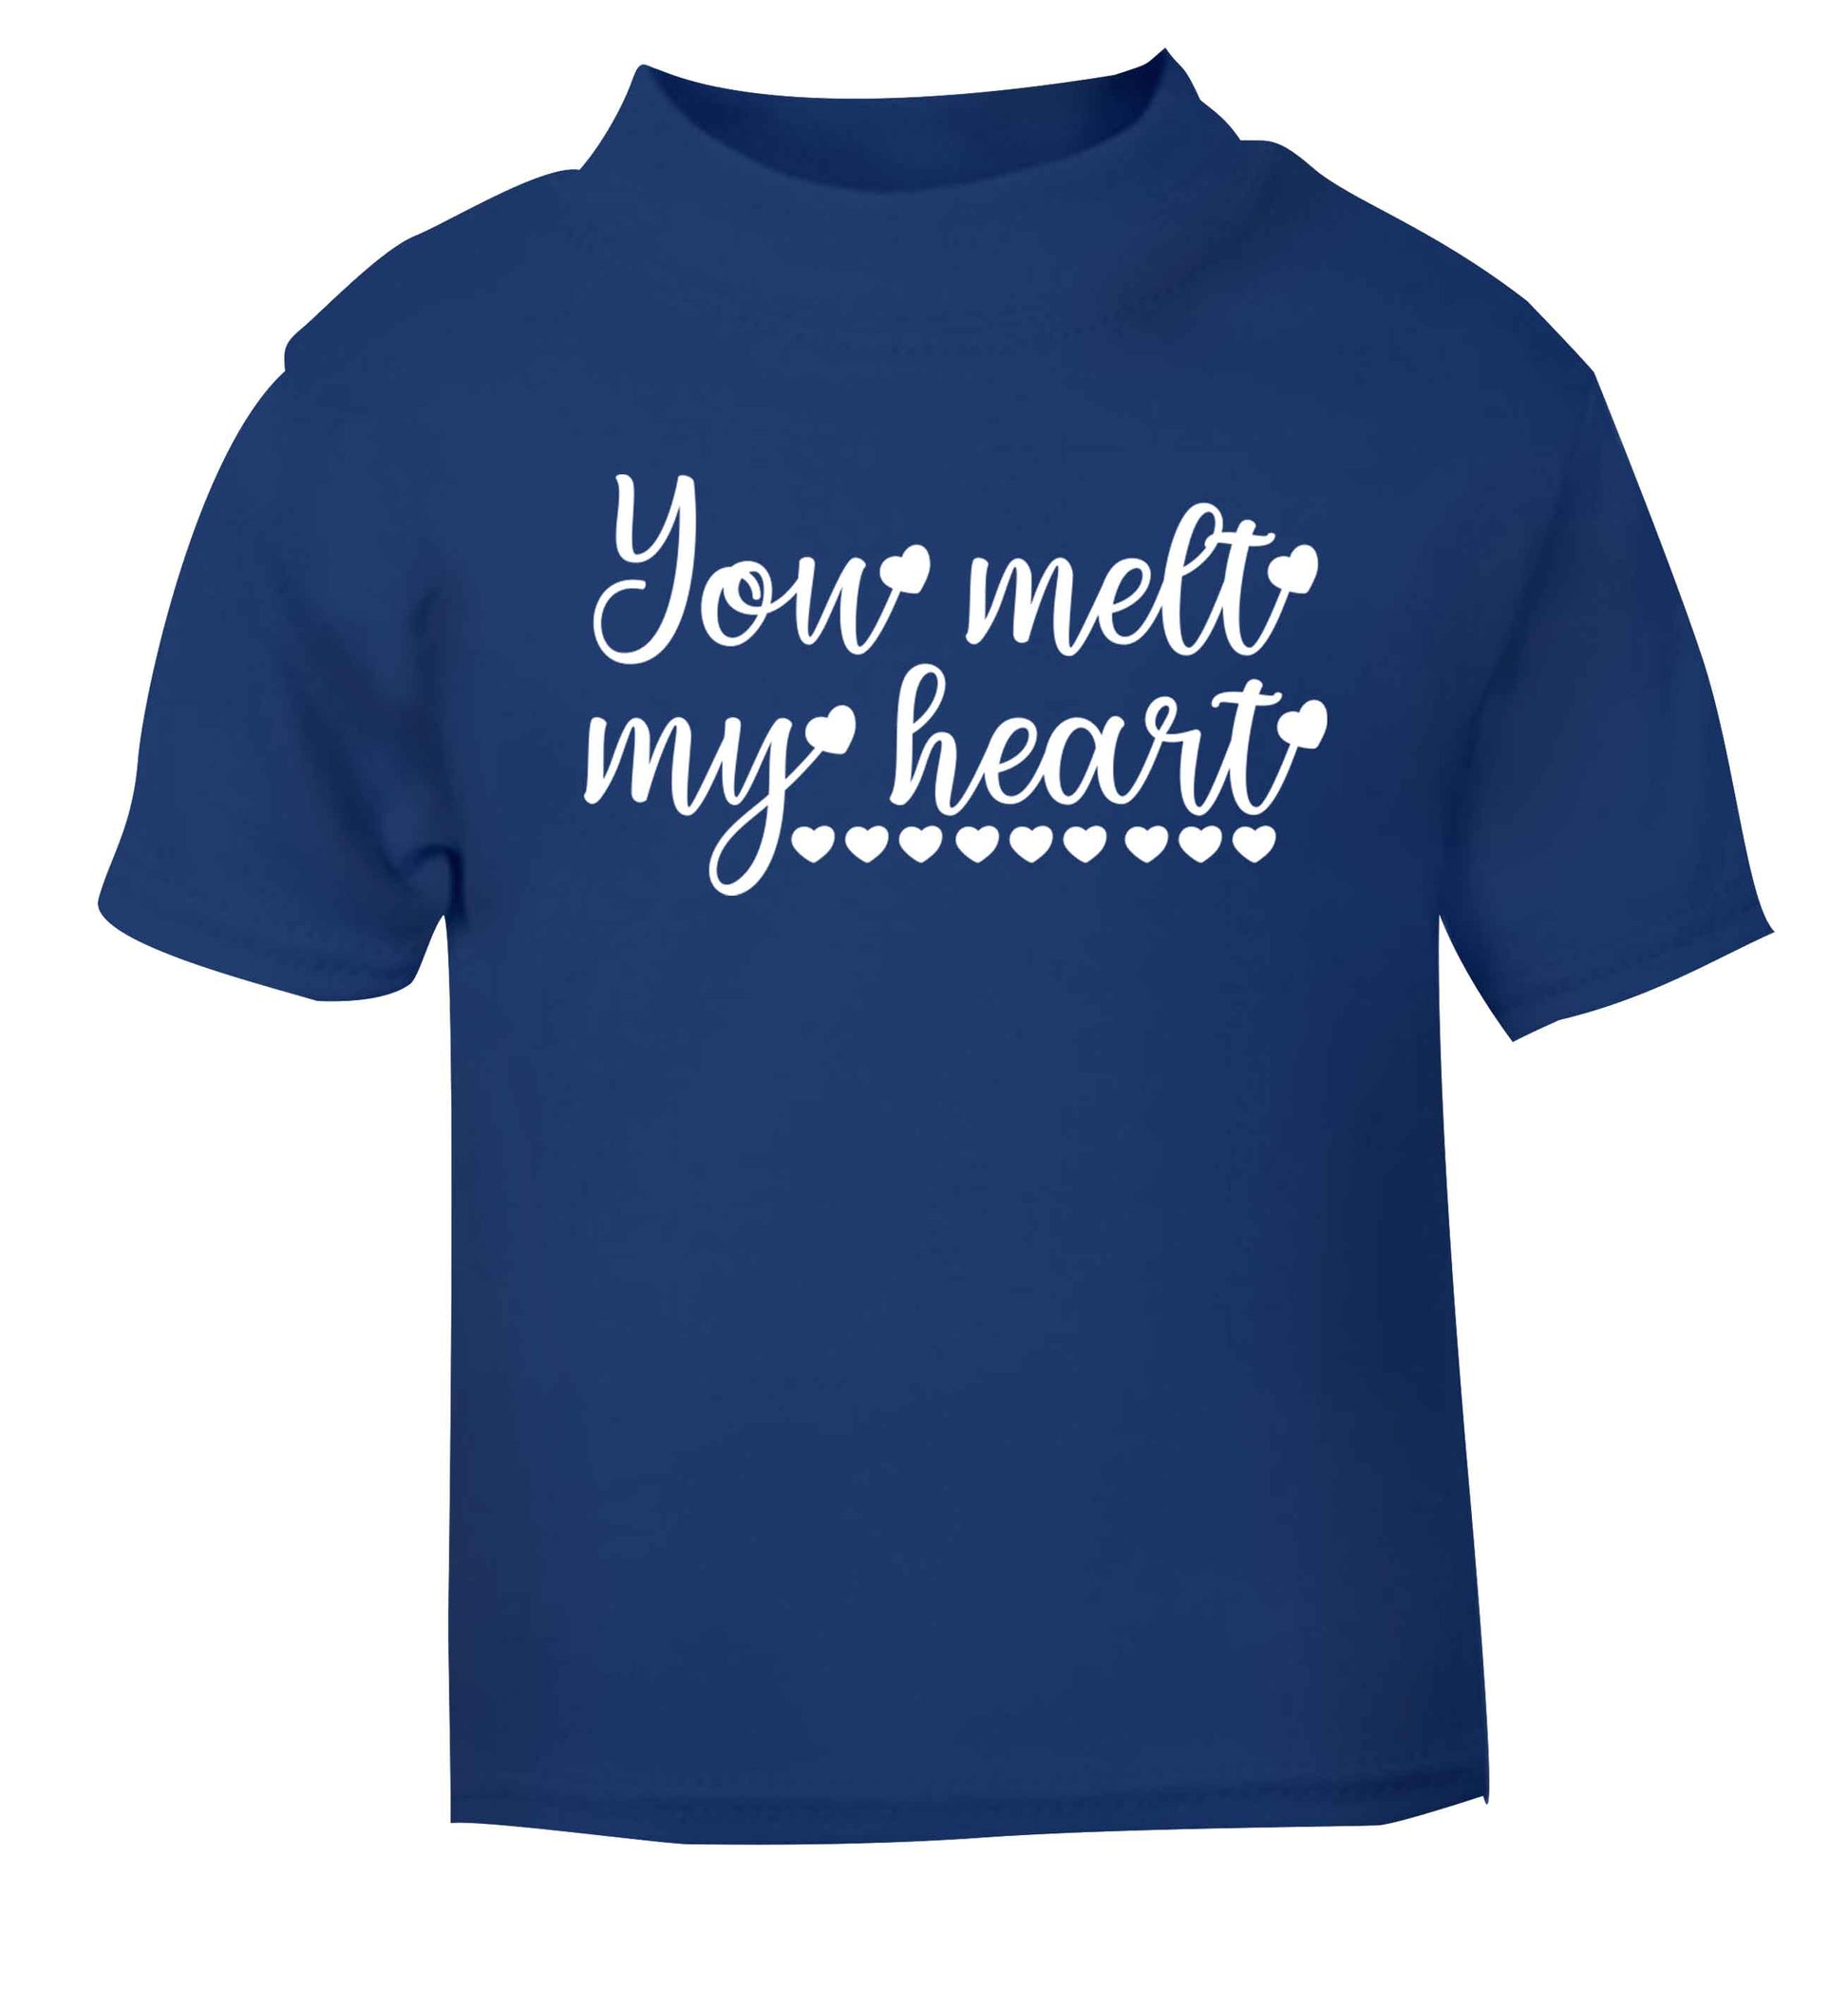 You melt my heart blue baby toddler Tshirt 2 Years